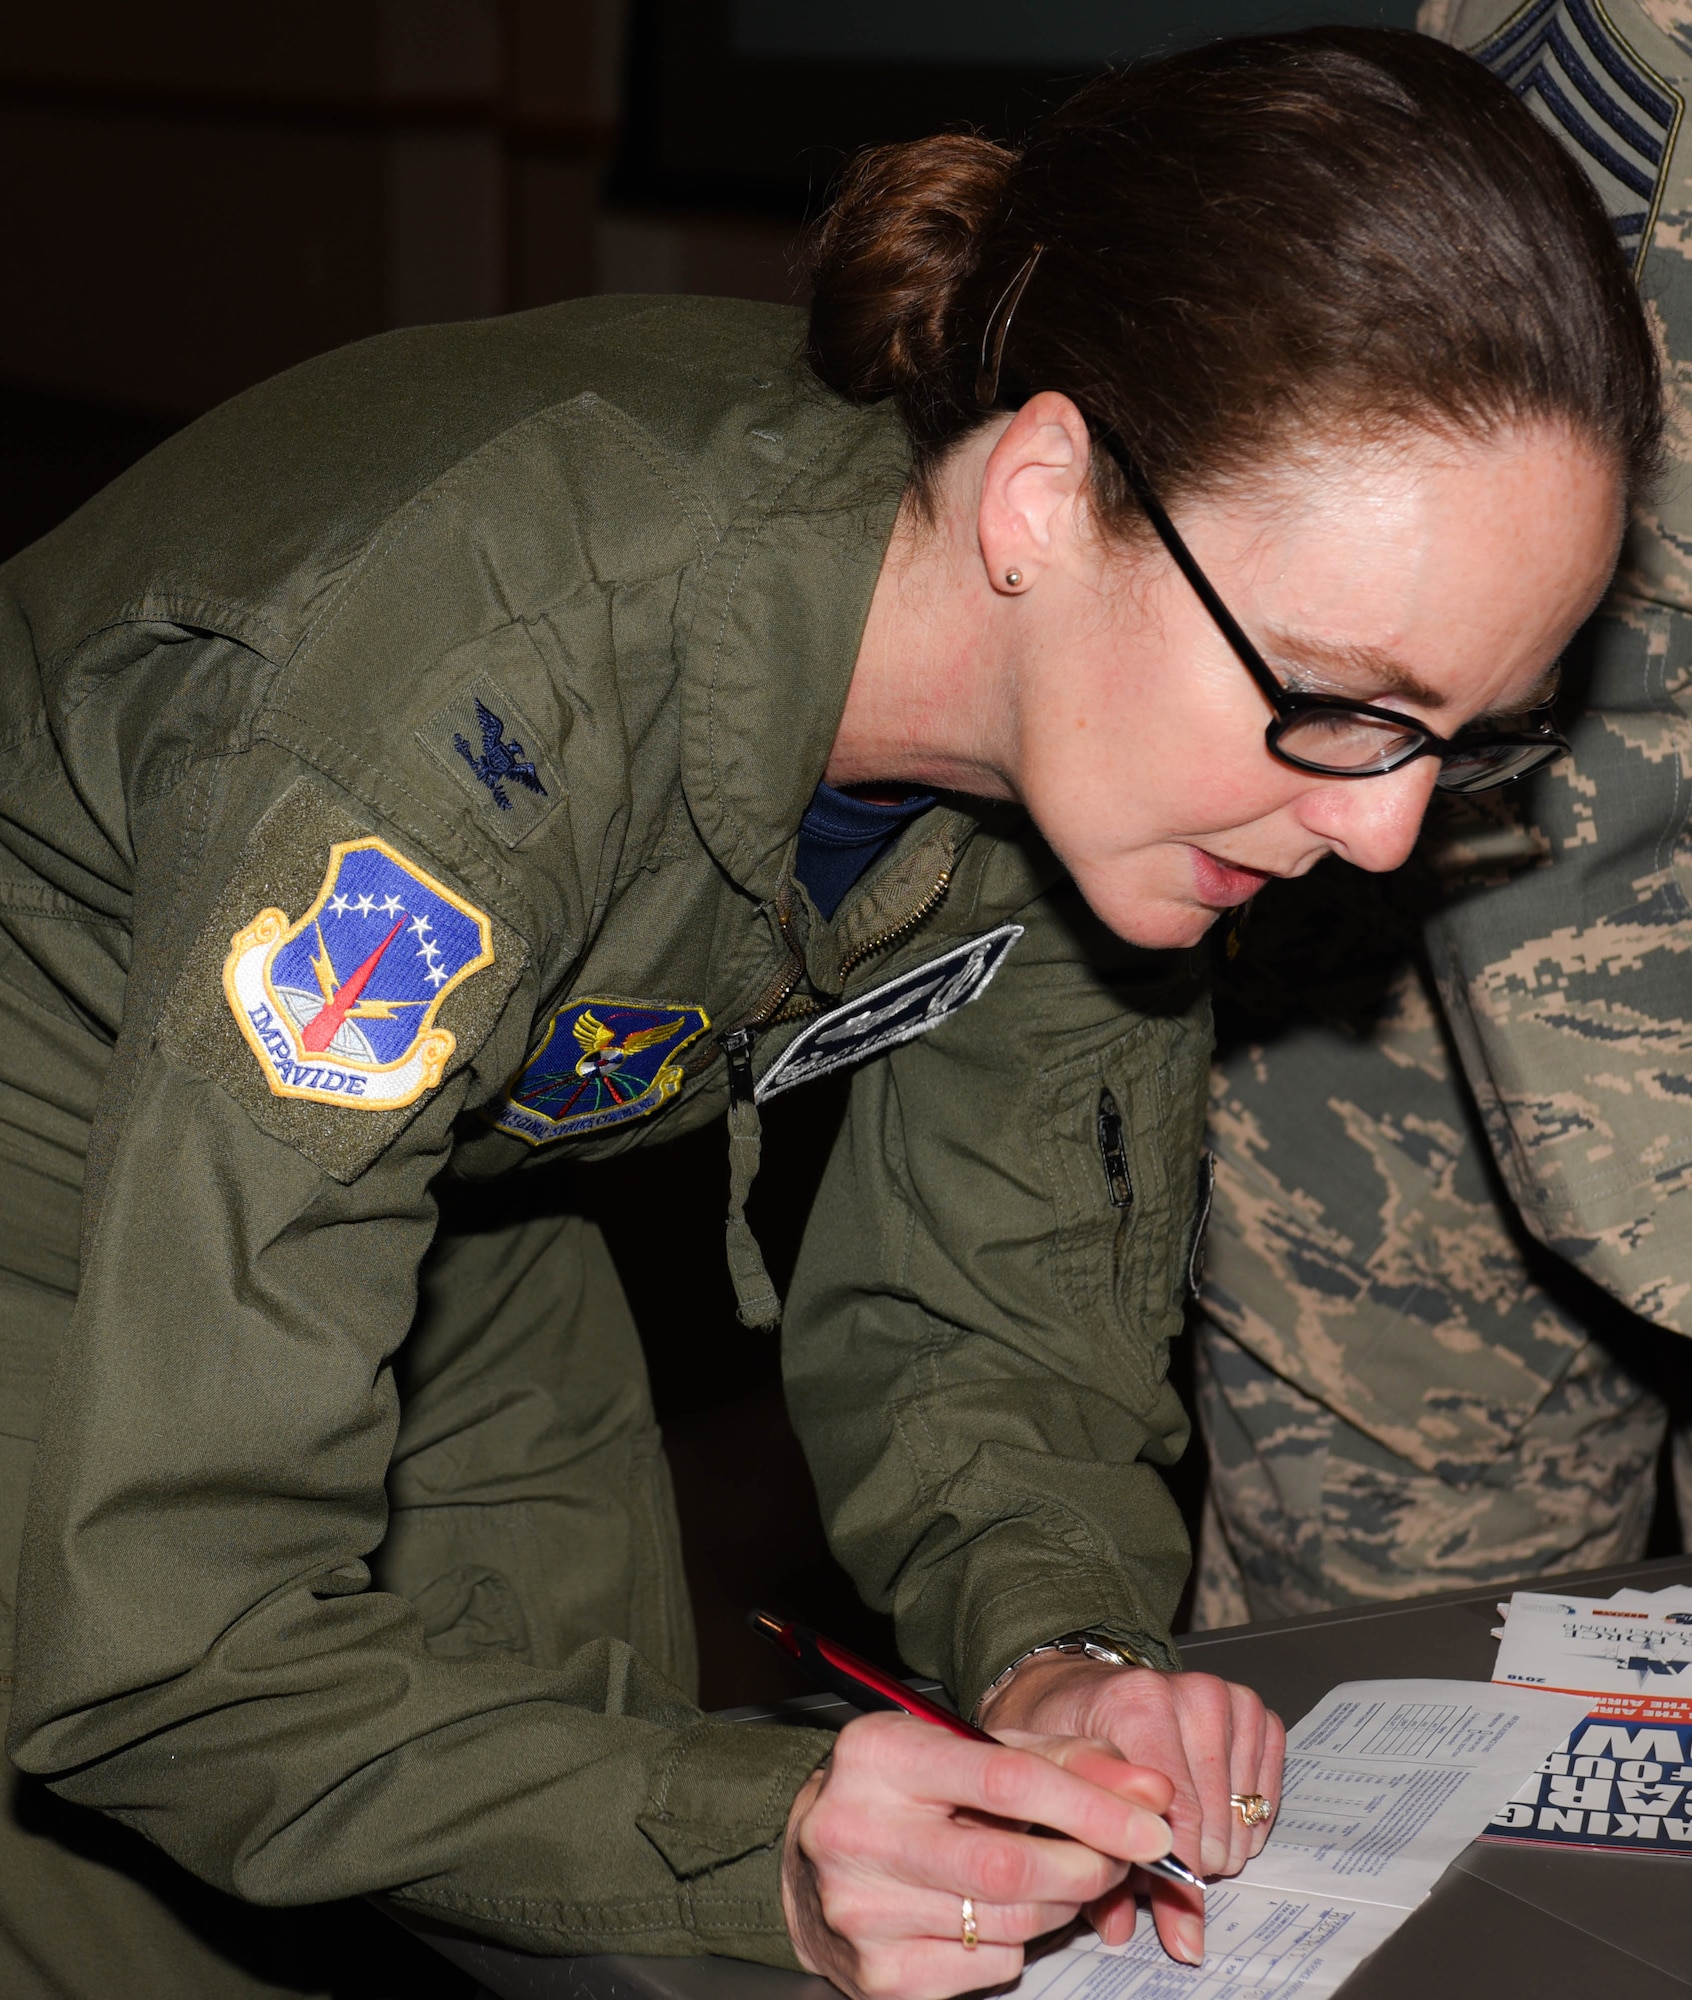 Col. Stacy Jo Huser, 90th Missile Wing commander, fills out a contribution slip during the Air Force Assistance Fund kickoff event at F.E. Warren Air Force Base, Wyo., March 30, 2018. The purpose of the event was to inform Airmen on base about the program and to receive the first contributions. AFAF helps Airmen with financial aid in instances such as, emergency situations, securing a retirement home for widows or widowers of Air Force members and more. (U.S. Air Force photo by Airman 1st Class Braydon Williams)